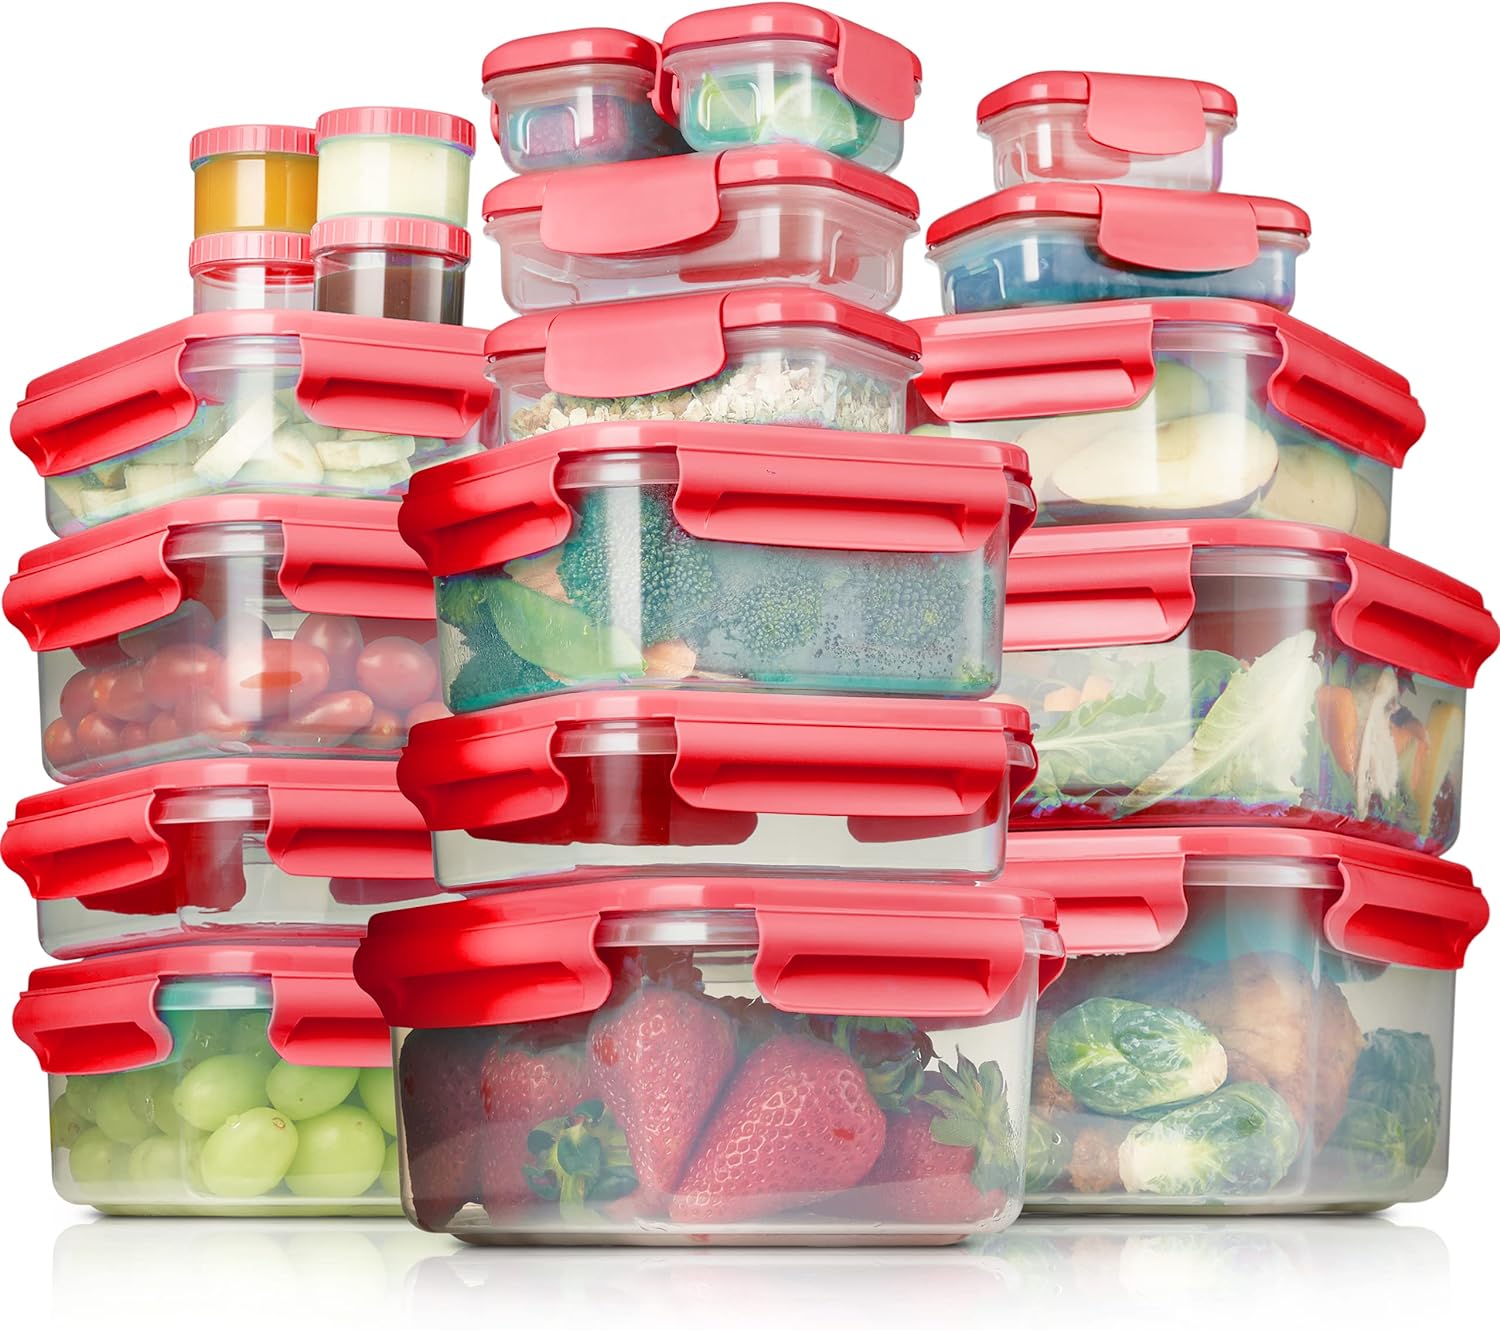 Food Storage Containers With Lids, 40-Piece Airtight Leakproof, BPA-Free Durable Plastic Food Containers for Leftovers - Freezer, Microwave & Dishwasher-Safe (Red)